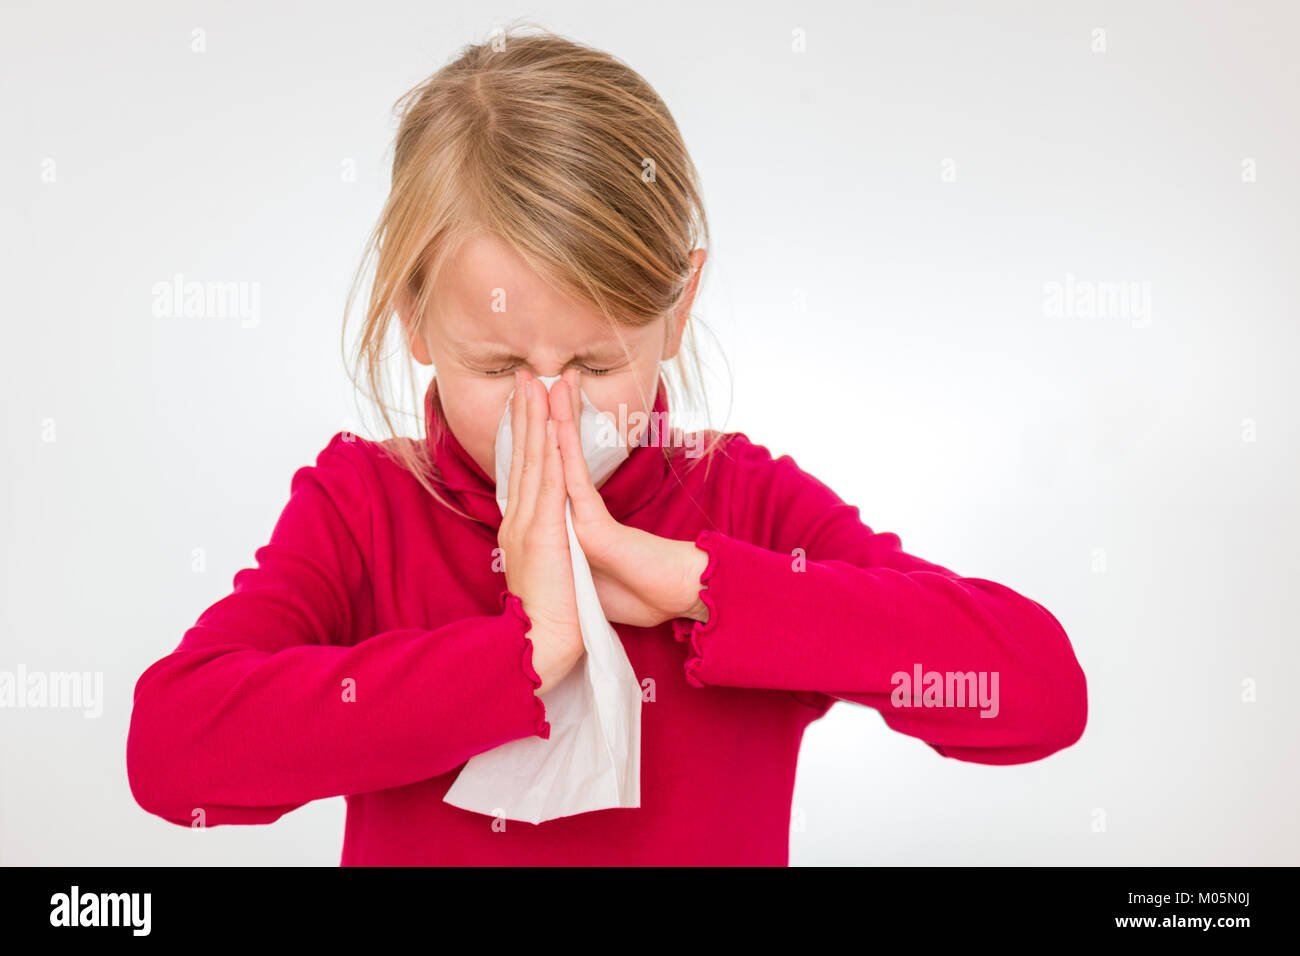 A girl is biting into a white handkerchief. She is 7 years old and wears a red pullover. Stock Photo